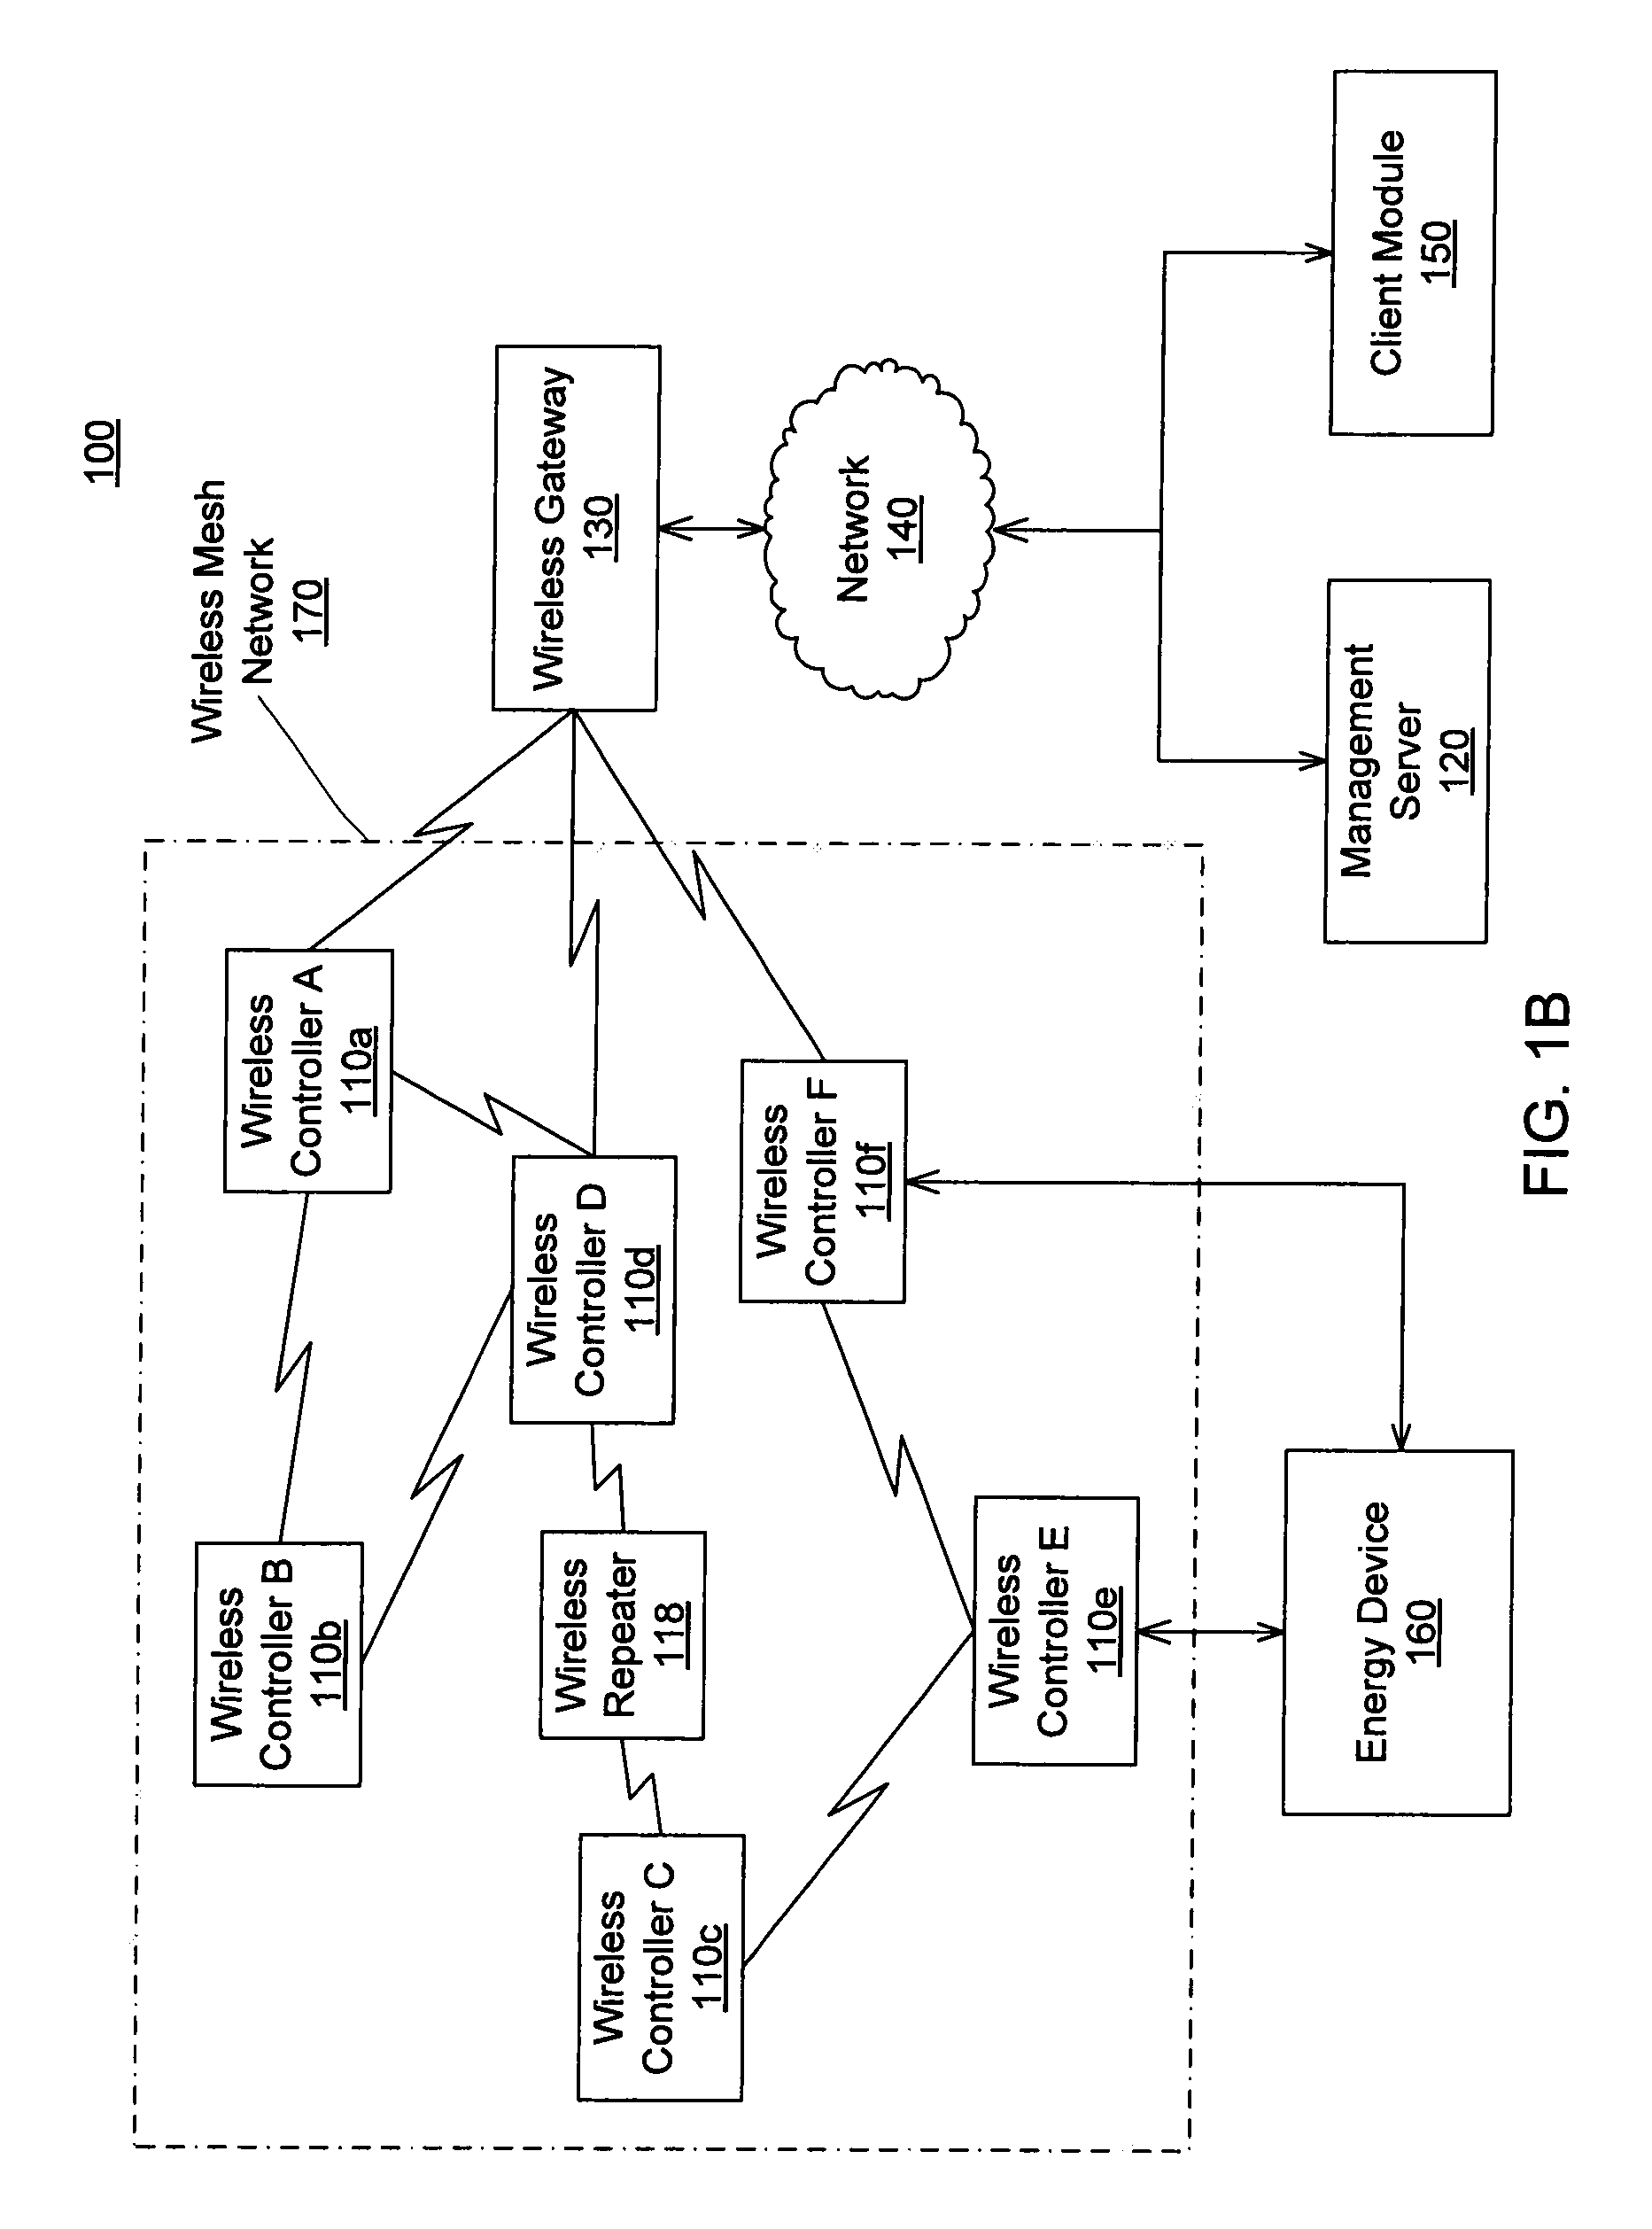 System and method for a wireless controller